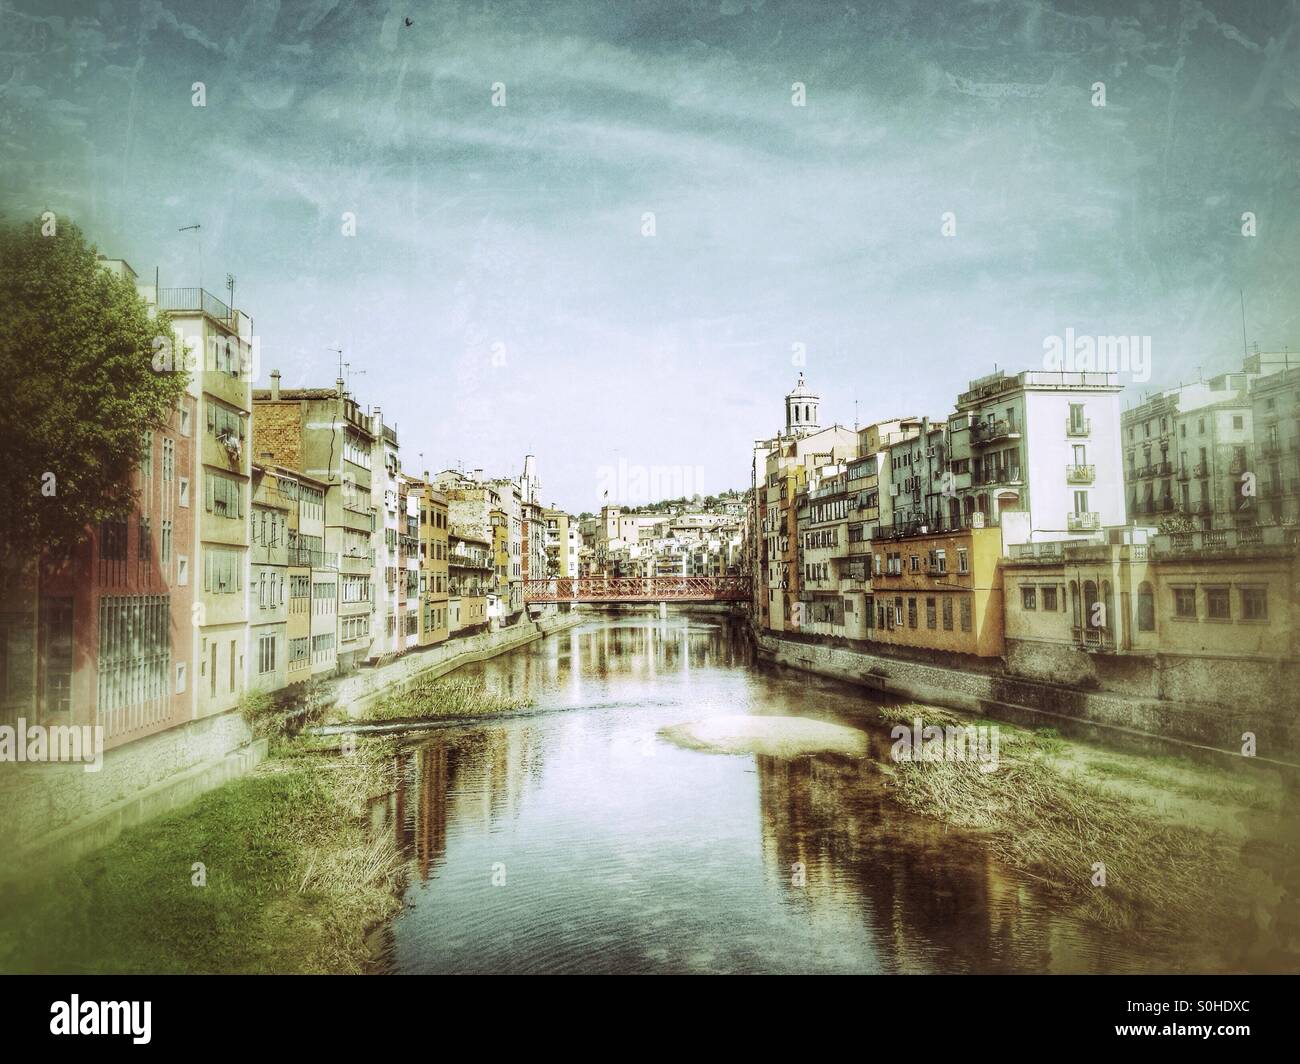 View of the city of Girona, Spain Stock Photo